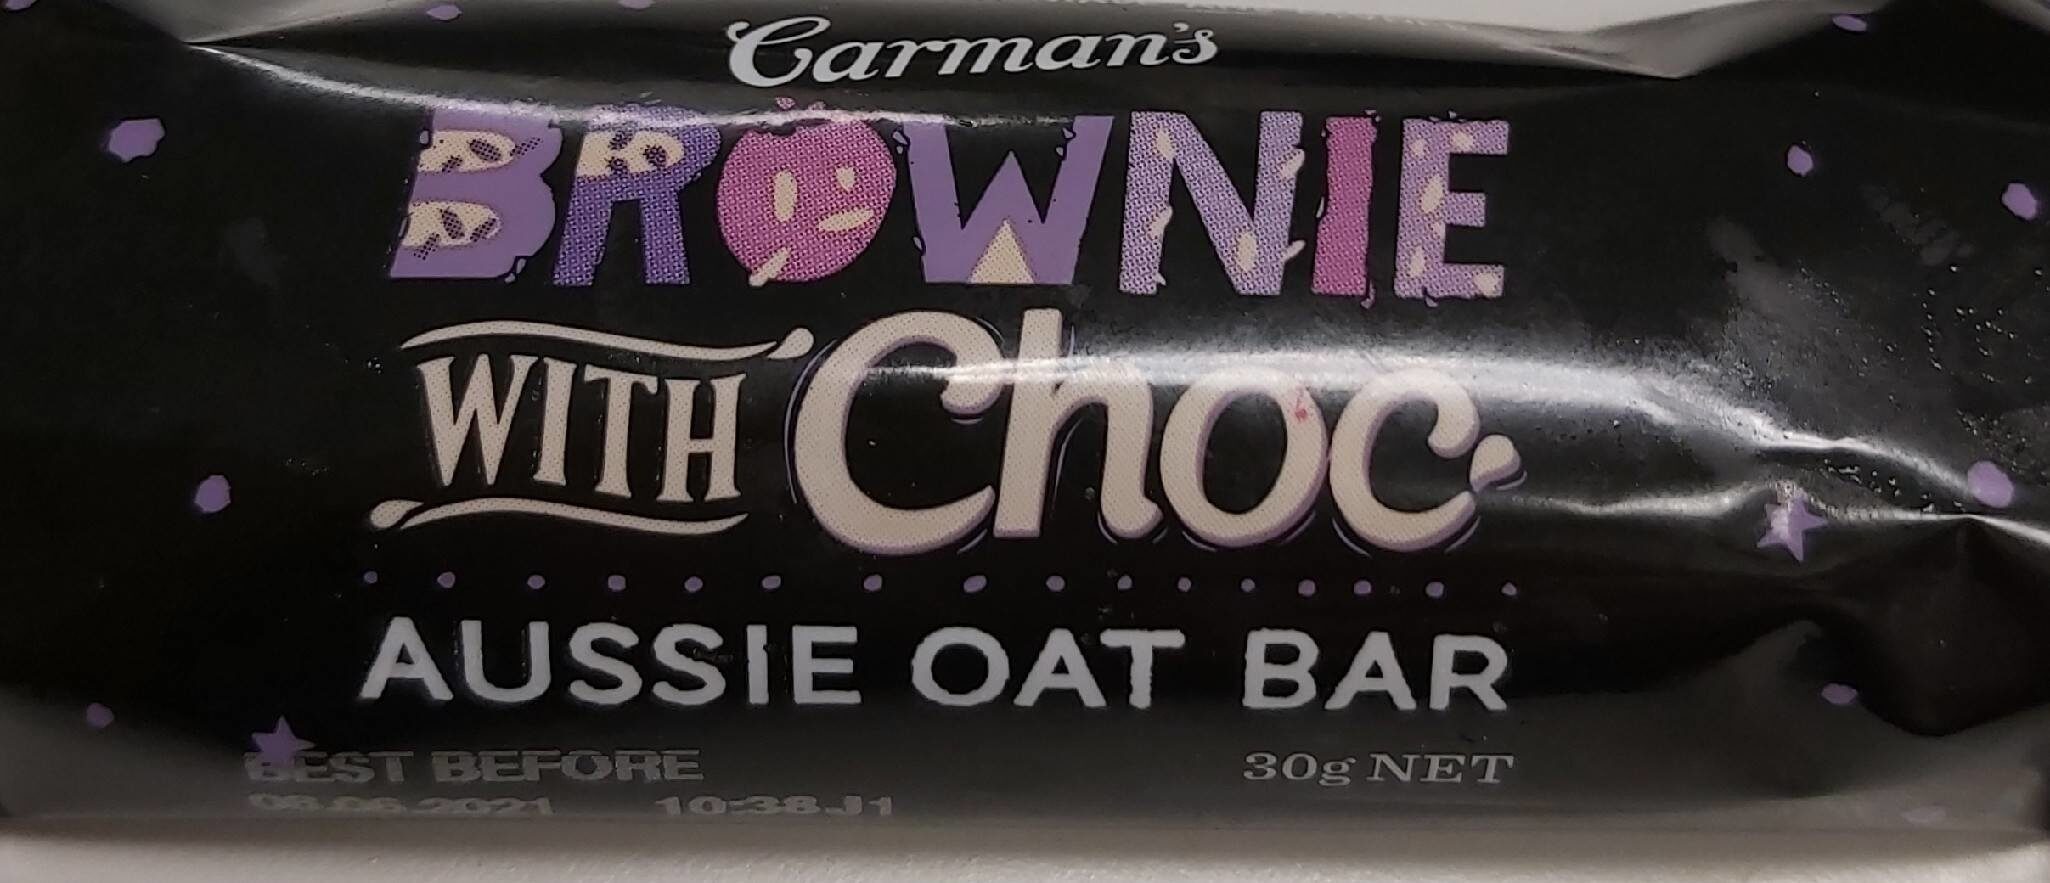 Aussie Oat Bar Brownie with Choc - Product - en